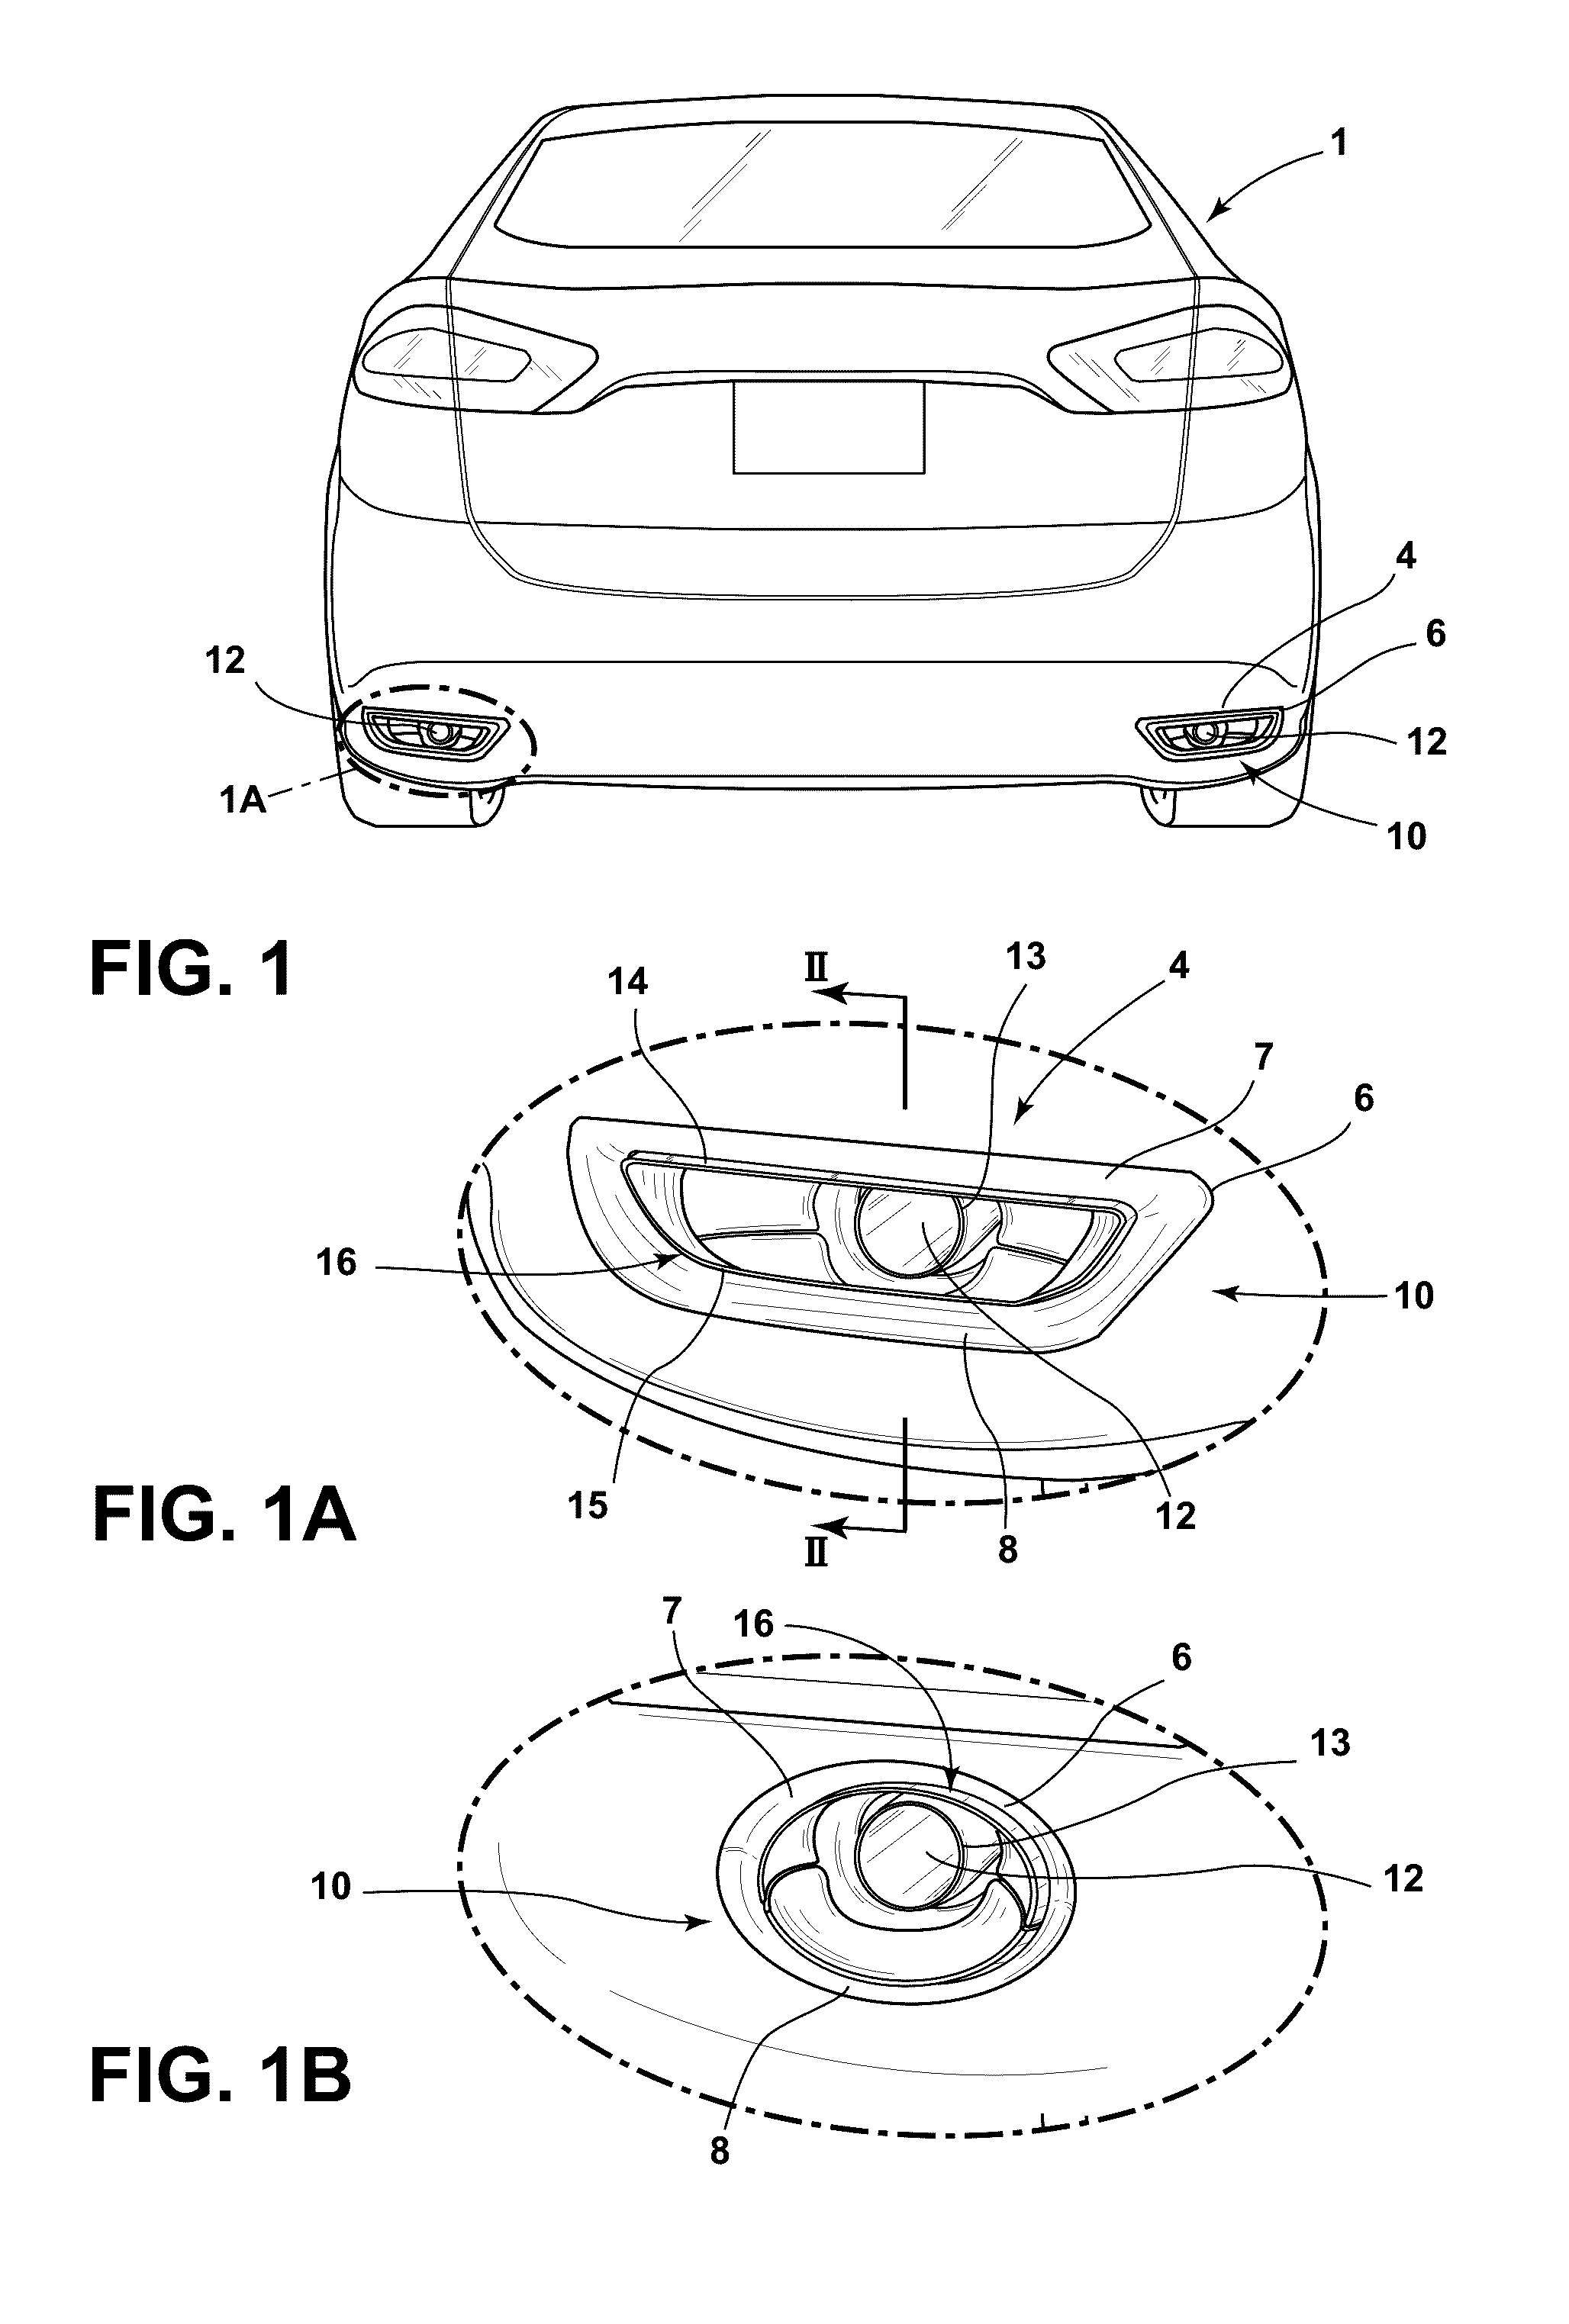 Methods for designing an exhaust assembly for a vehicle